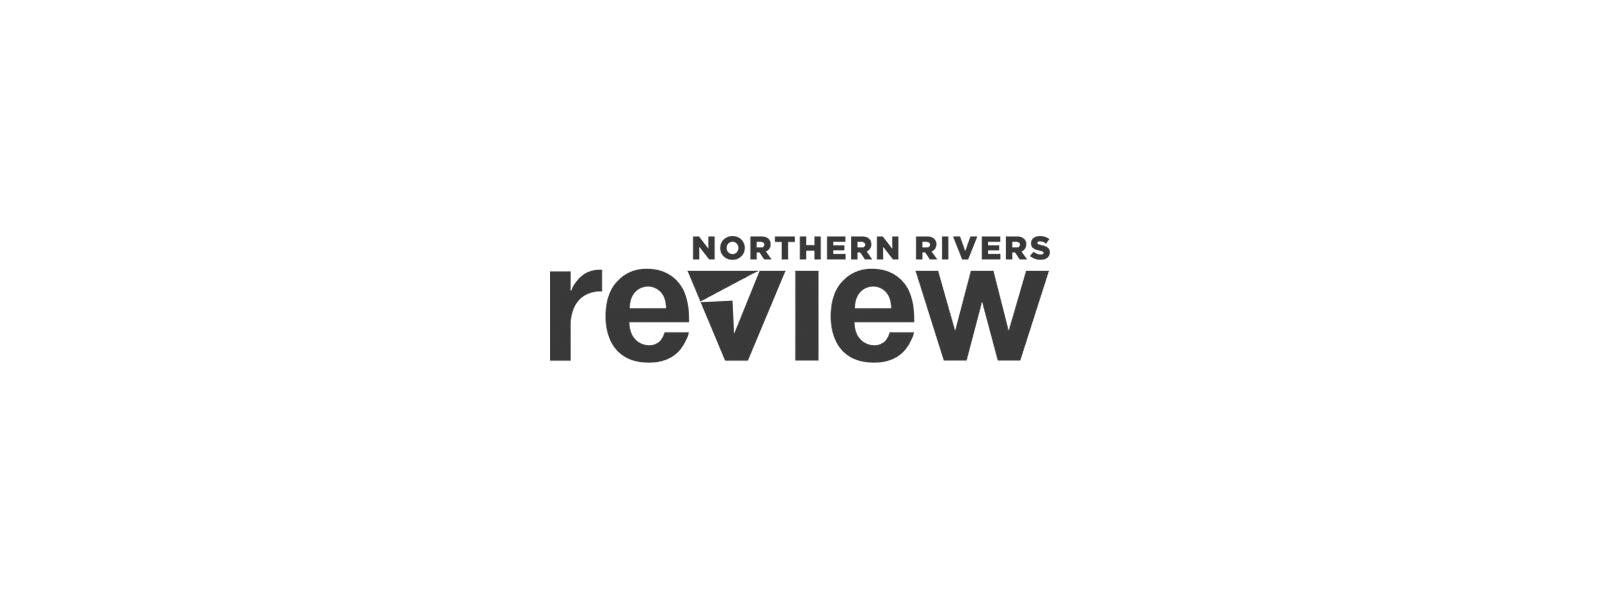 Funding will help create almost 100 new jobs in the region │ Northern Rivers Review